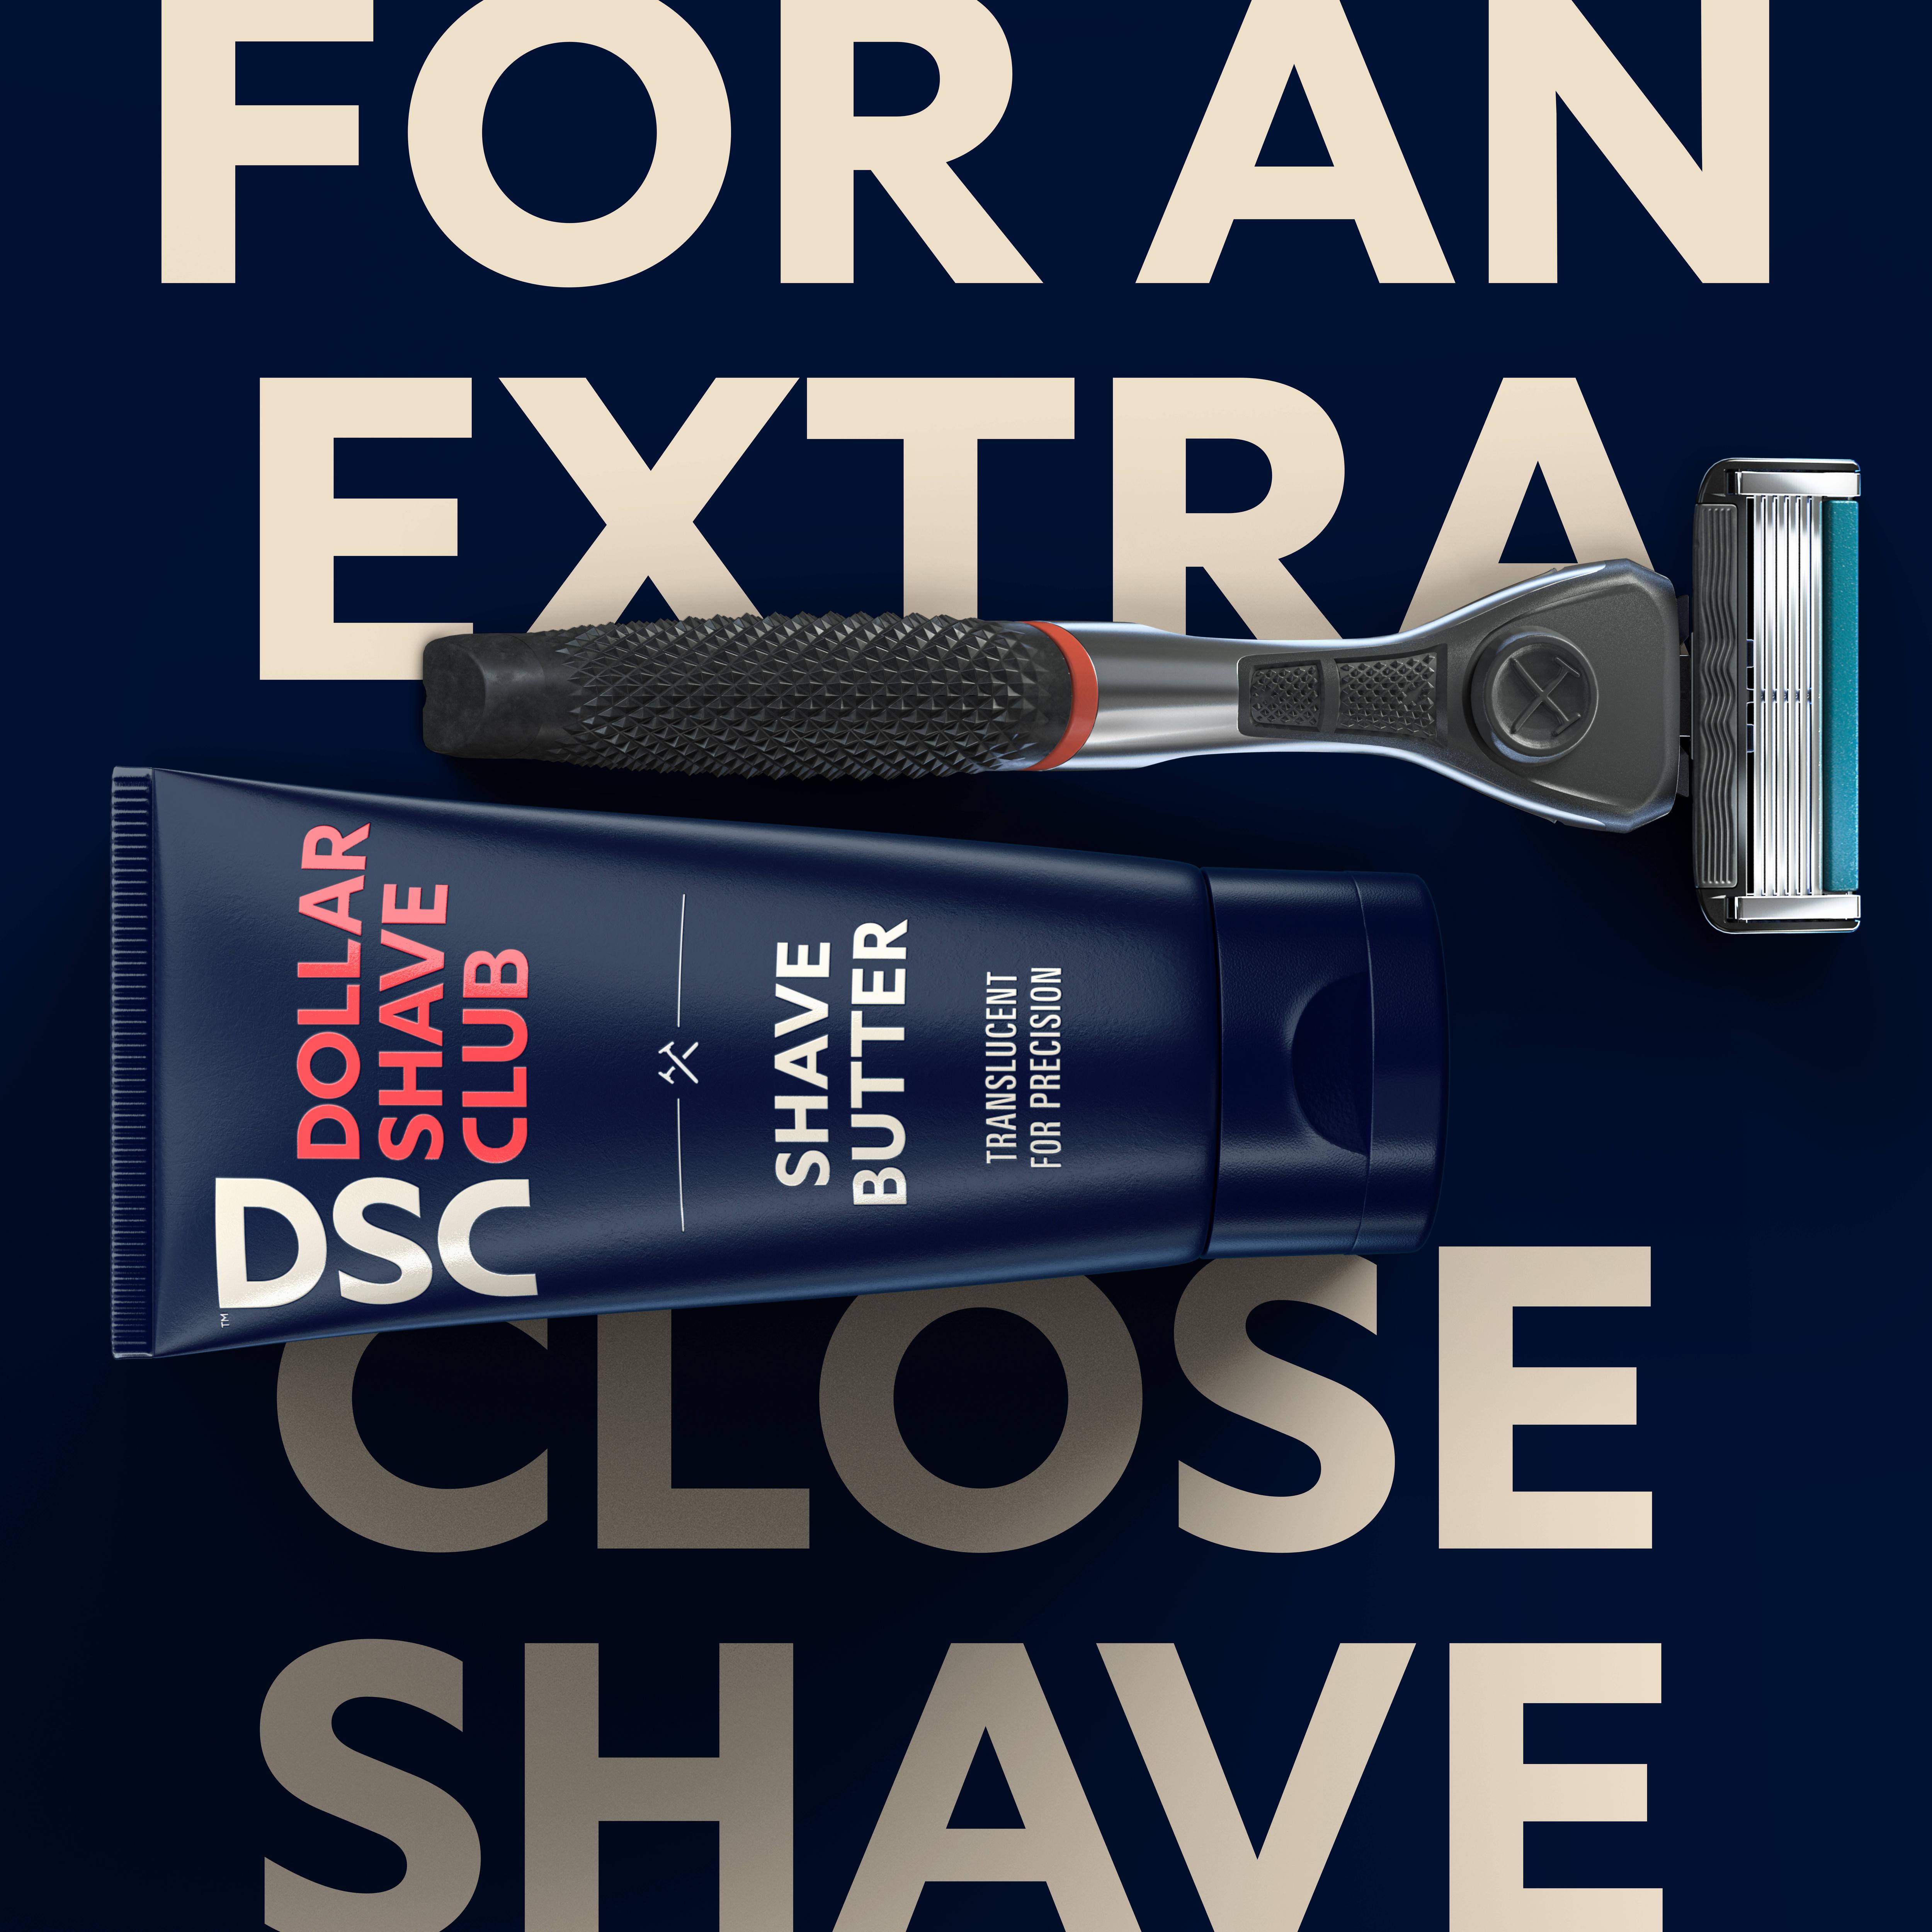 Dollar Shave Club 6-Blade Razor Bundle (Grey) with Shave Butter, 1 Handle, 4 Cartridges, 3 oz - image 3 of 5